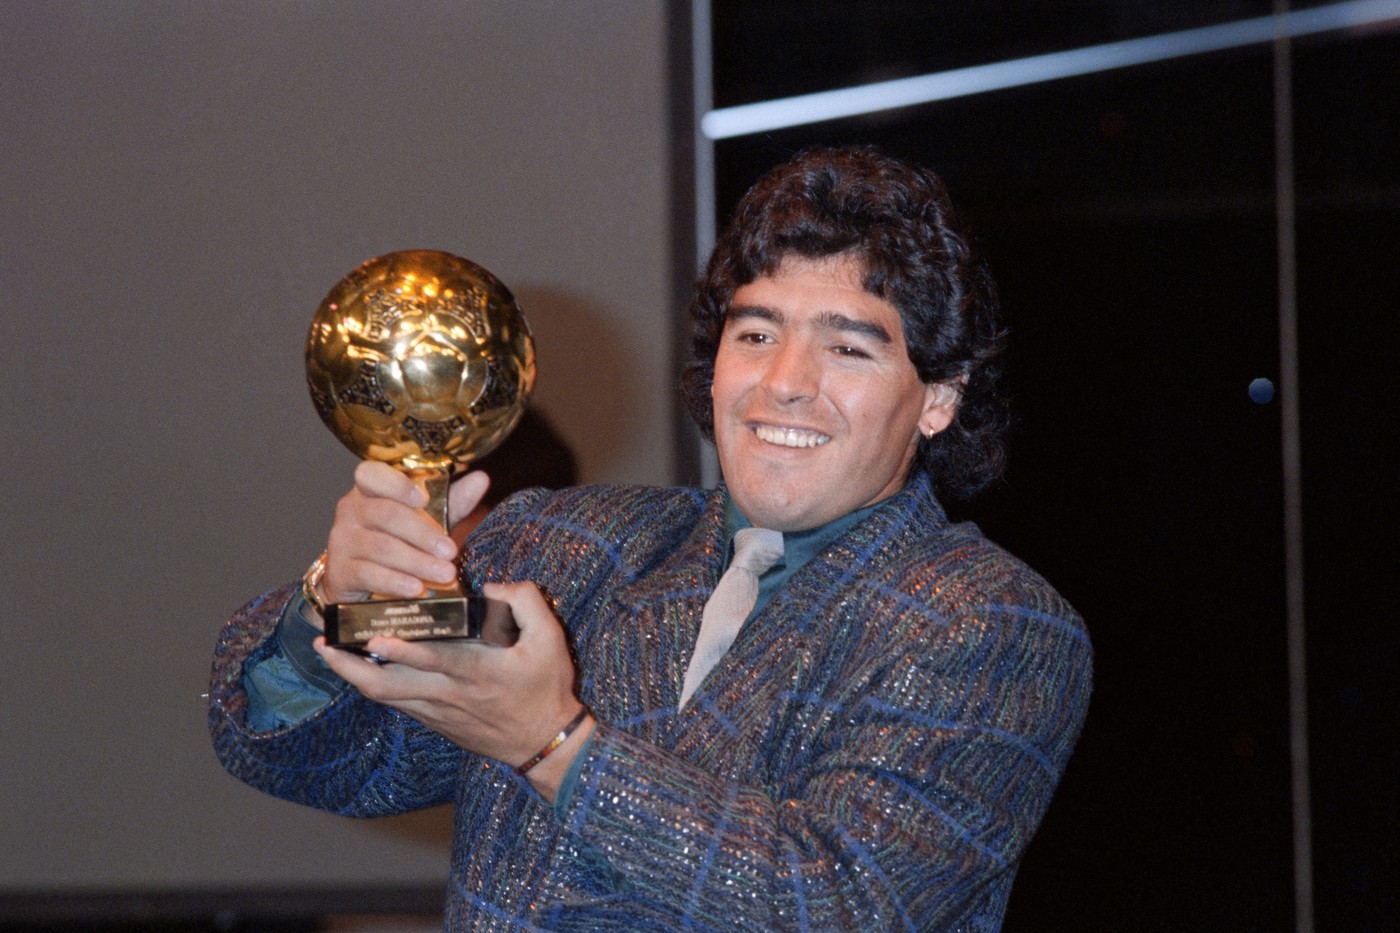 Diego Maradona poses with the Ballon d'Or at the Lido in Paris on November 13, 1986. He was awarded following the 1986 FIFA World Cup. The Golden Ball award is presented to the best player at each FIFA World Cup finals.,Image: 800969633, License: Rights-managed, Restrictions: , Model Release: no